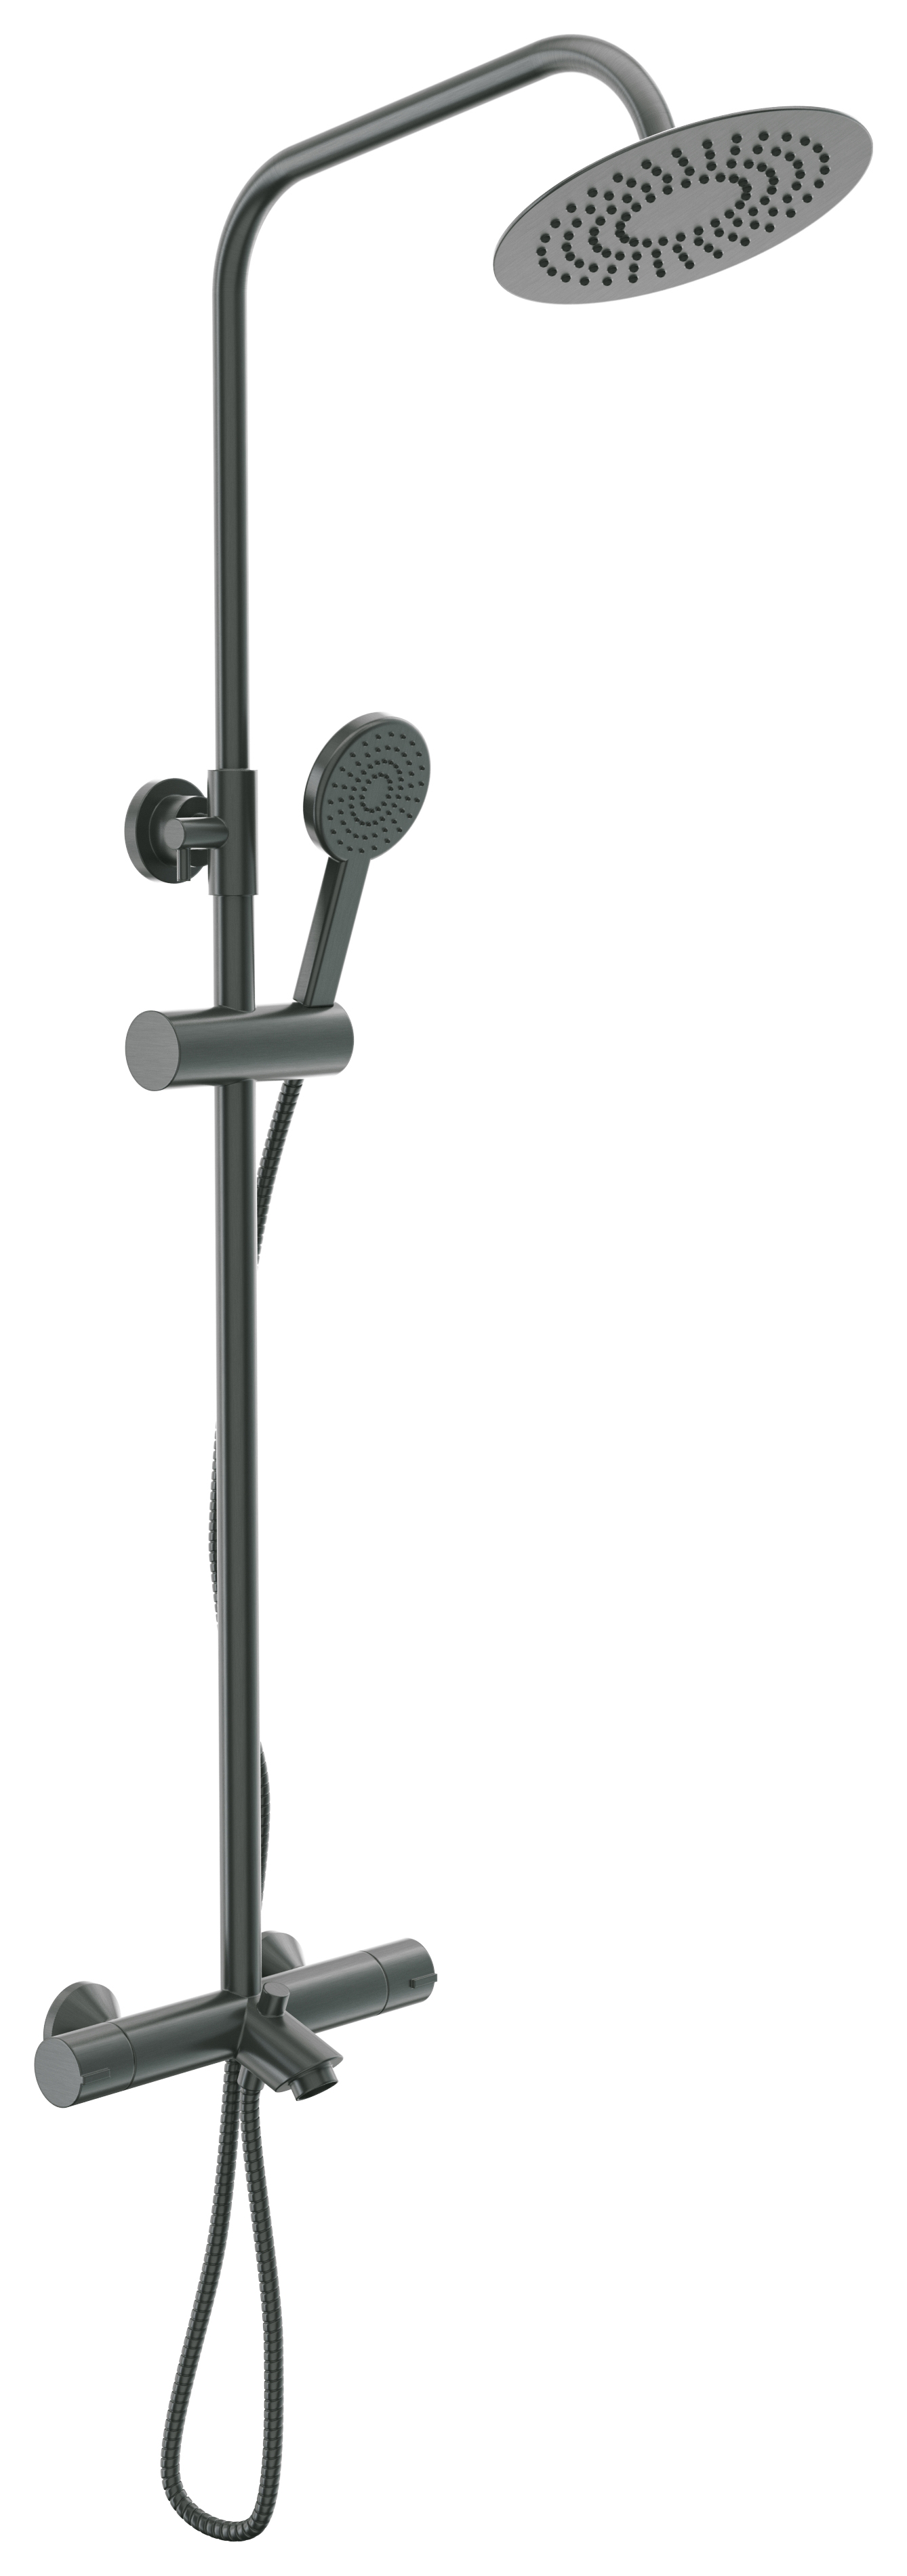 Hadleigh Wall Mounted Dual Outlet Bath Shower Mixer - Anthracite